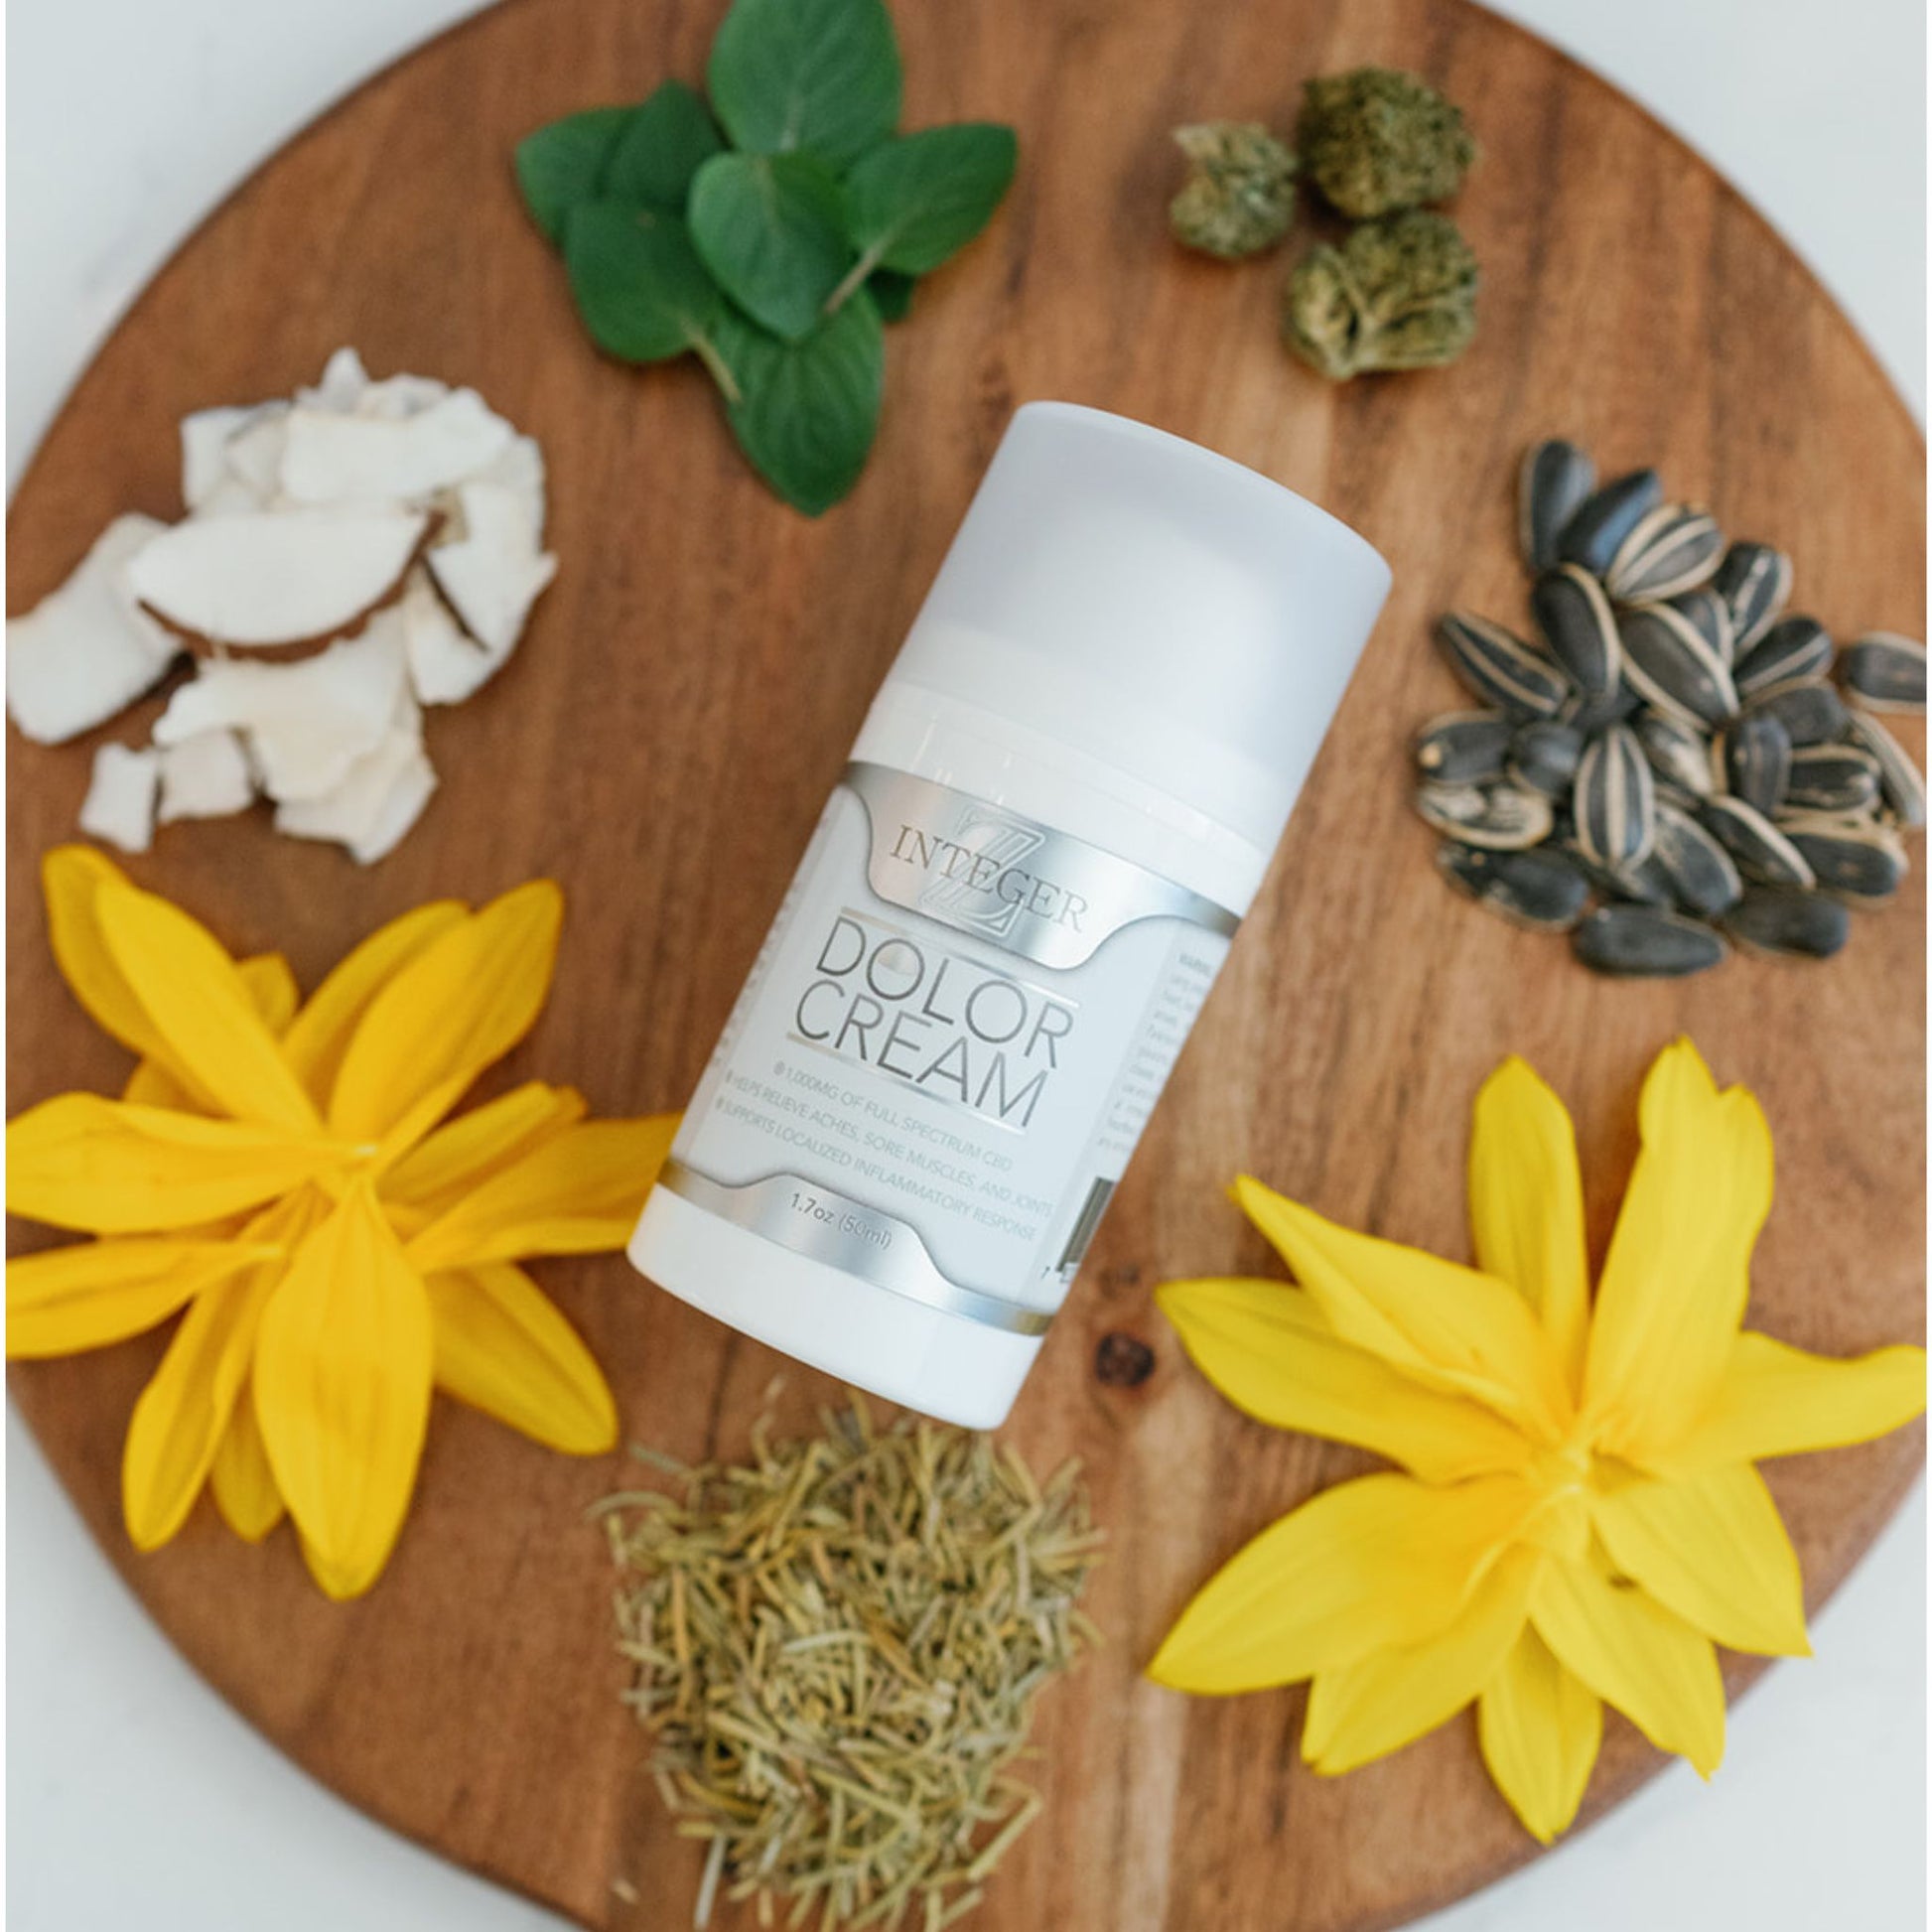 Dolor cream in the middle of  a wooden cutting board that is a cirlce. Around dolor cream is mint leaves, hemp flower, sunflower seeds, arnica flower, rosemary  and coconut chips